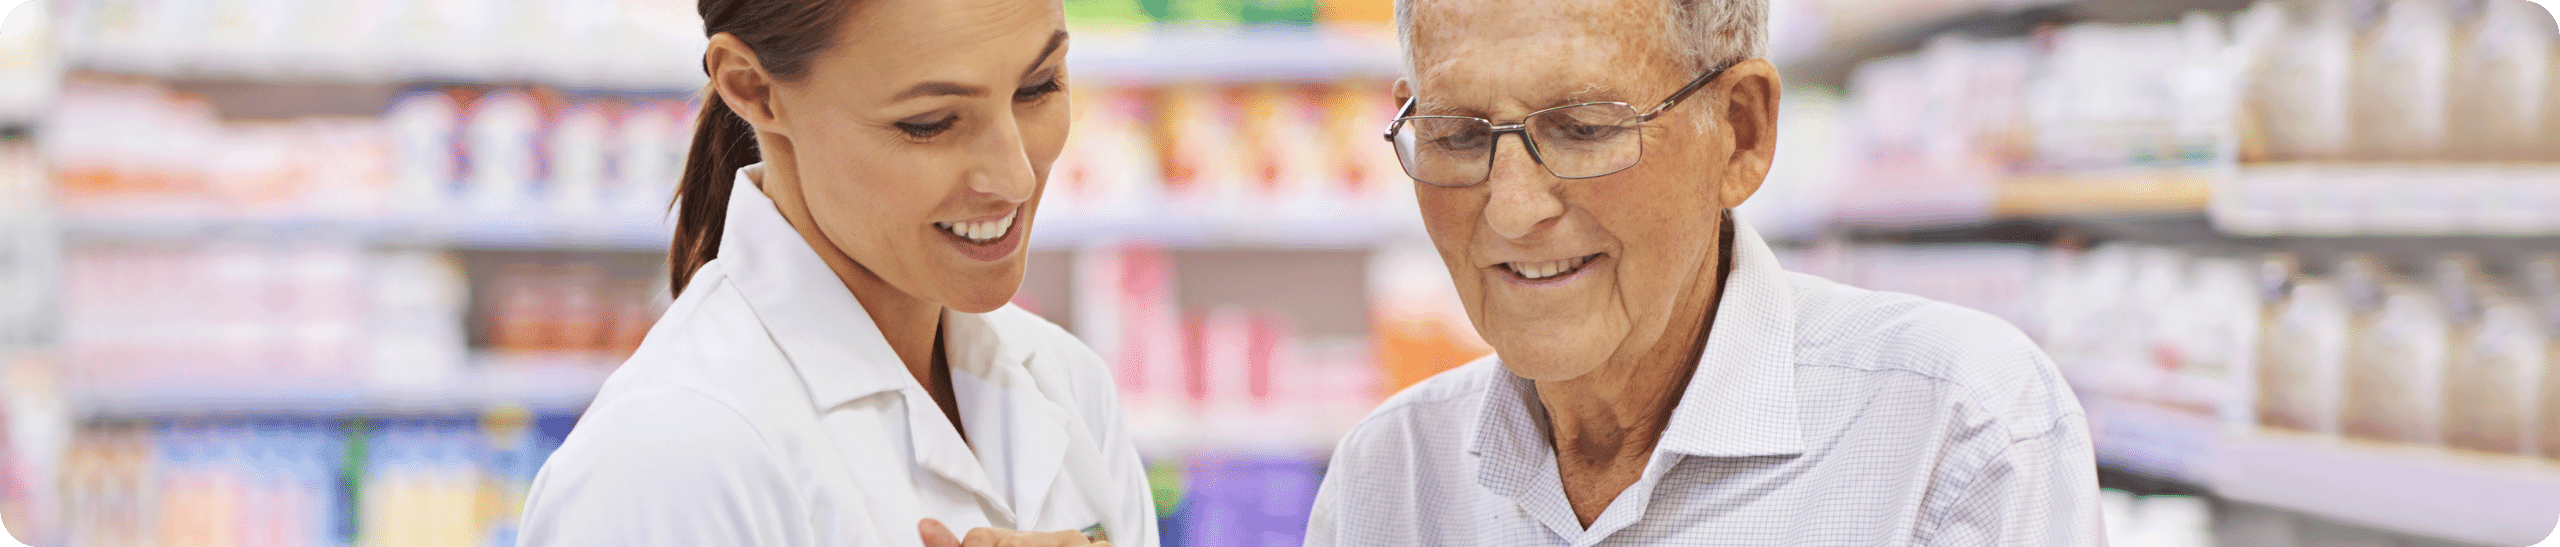 Woman and man talking in pharmacy